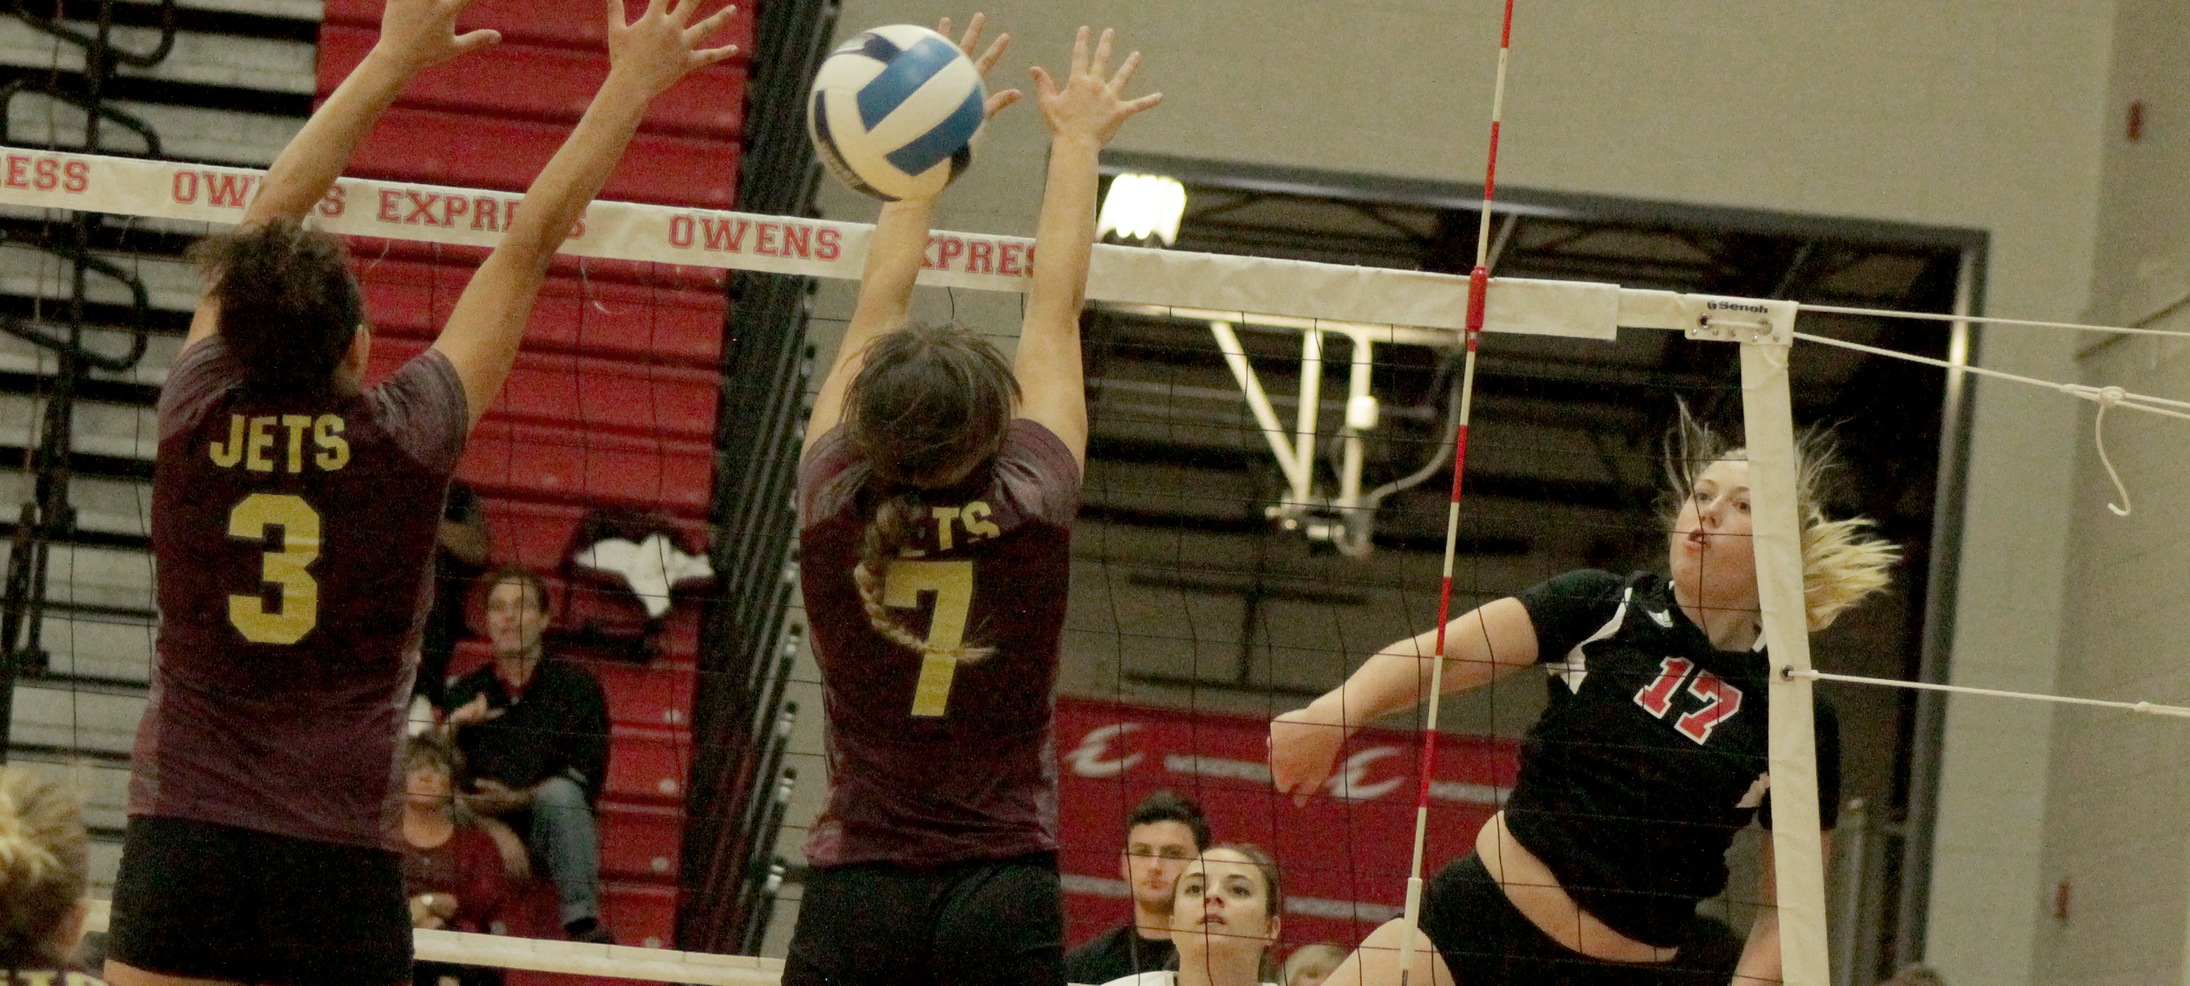 Michaela Eisenhauer hits it through the block in Friday's win over Jackson. Photo by Nicholas Huenefeld/Owens Sports Information